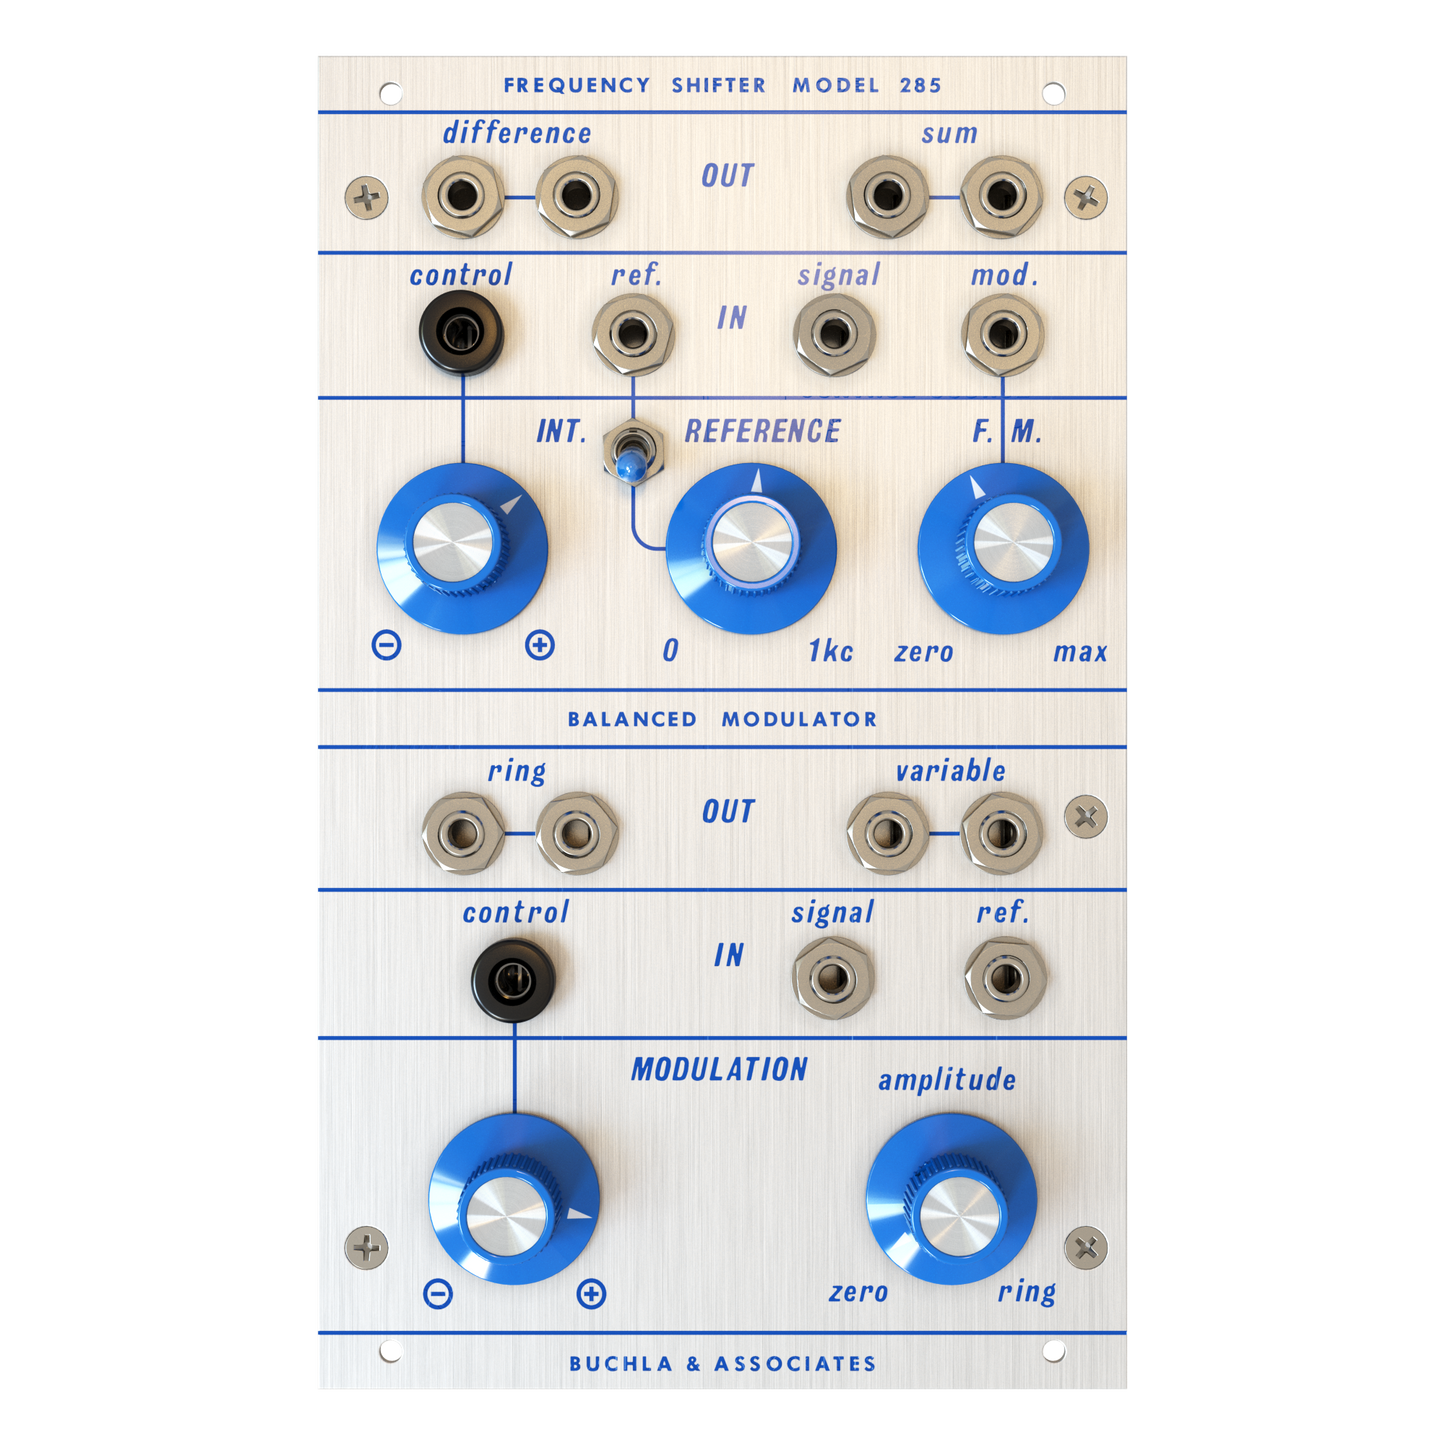 Frequency Shifter Model 285